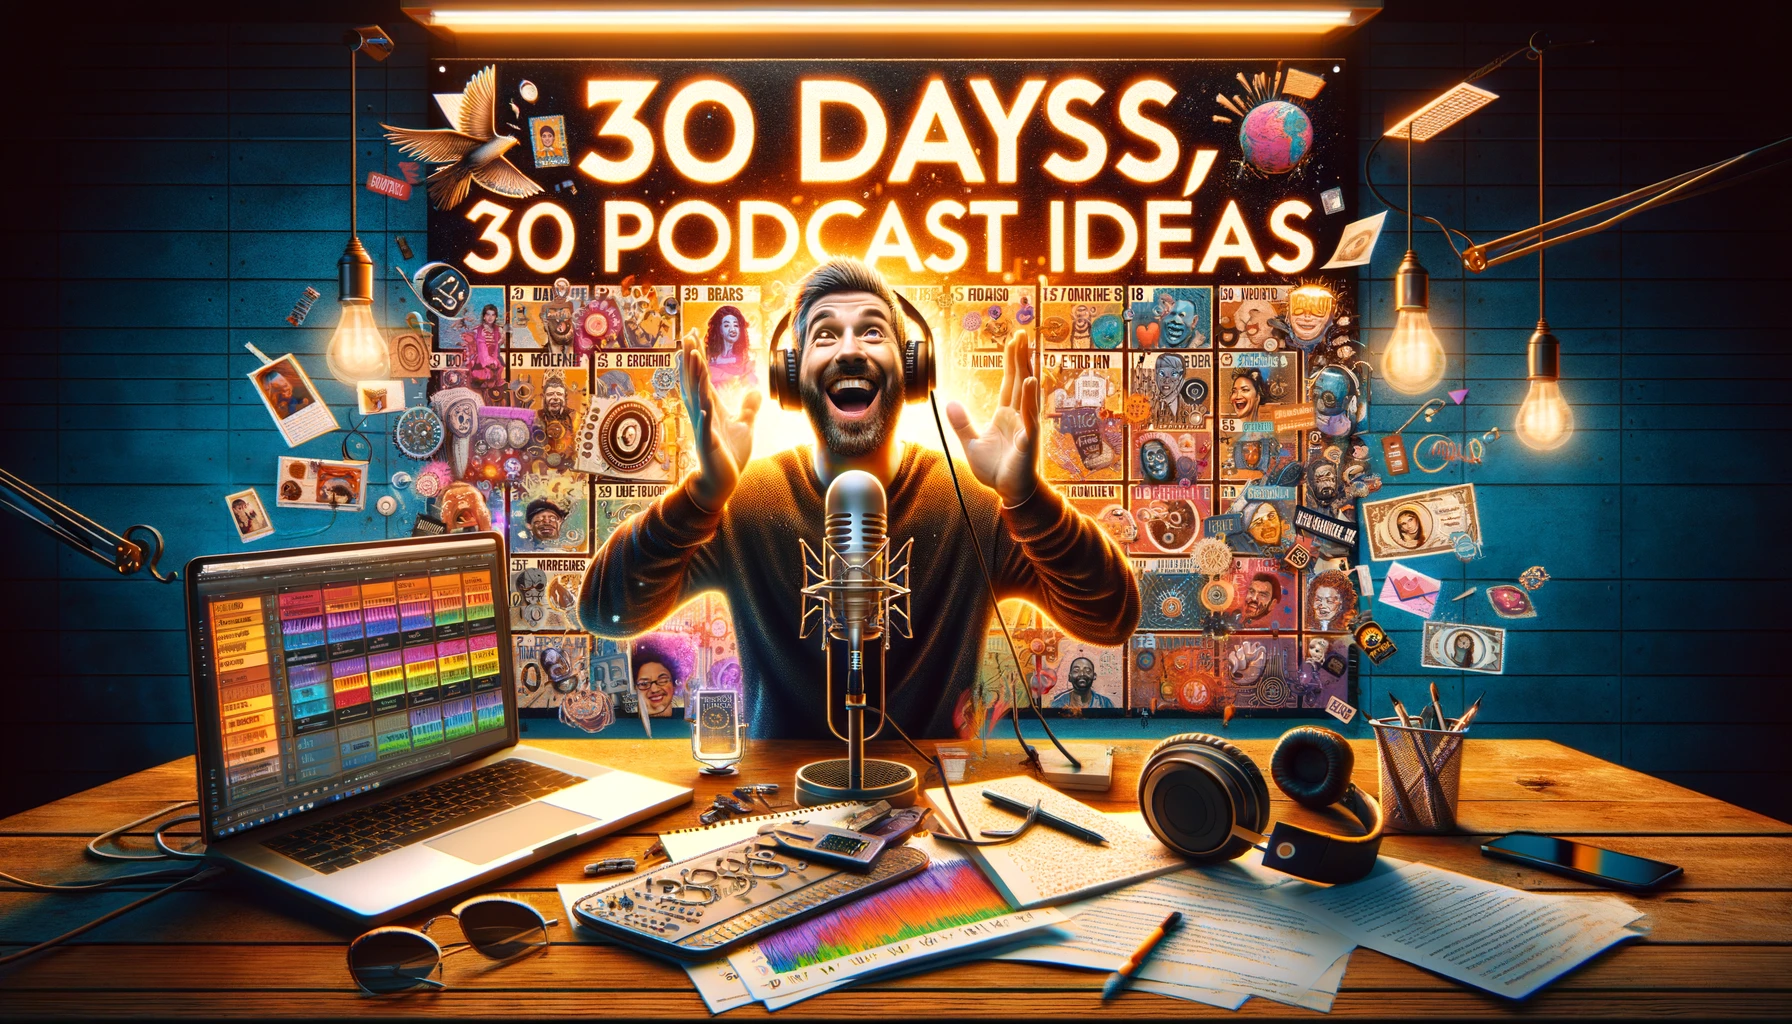 30 Days, 30 Podcast Ideas: A Month Of Inspiration To Launch Your Show